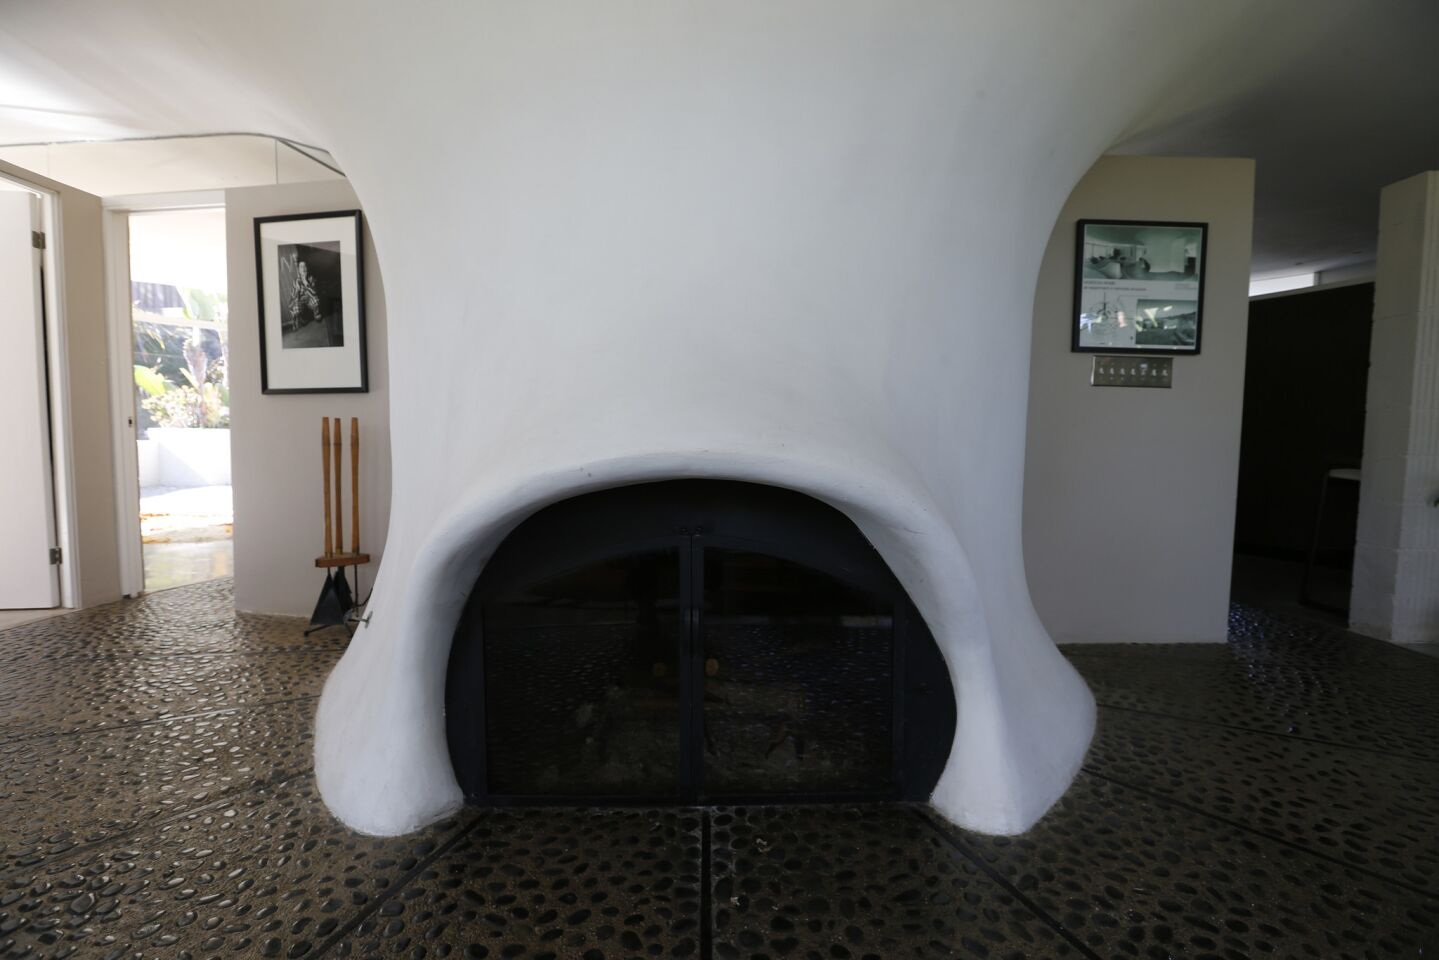 Einar Johnson and Pat Gough's sprayed-on “shotcrete” fireplace was hand-finished into a free-form, organic shape.